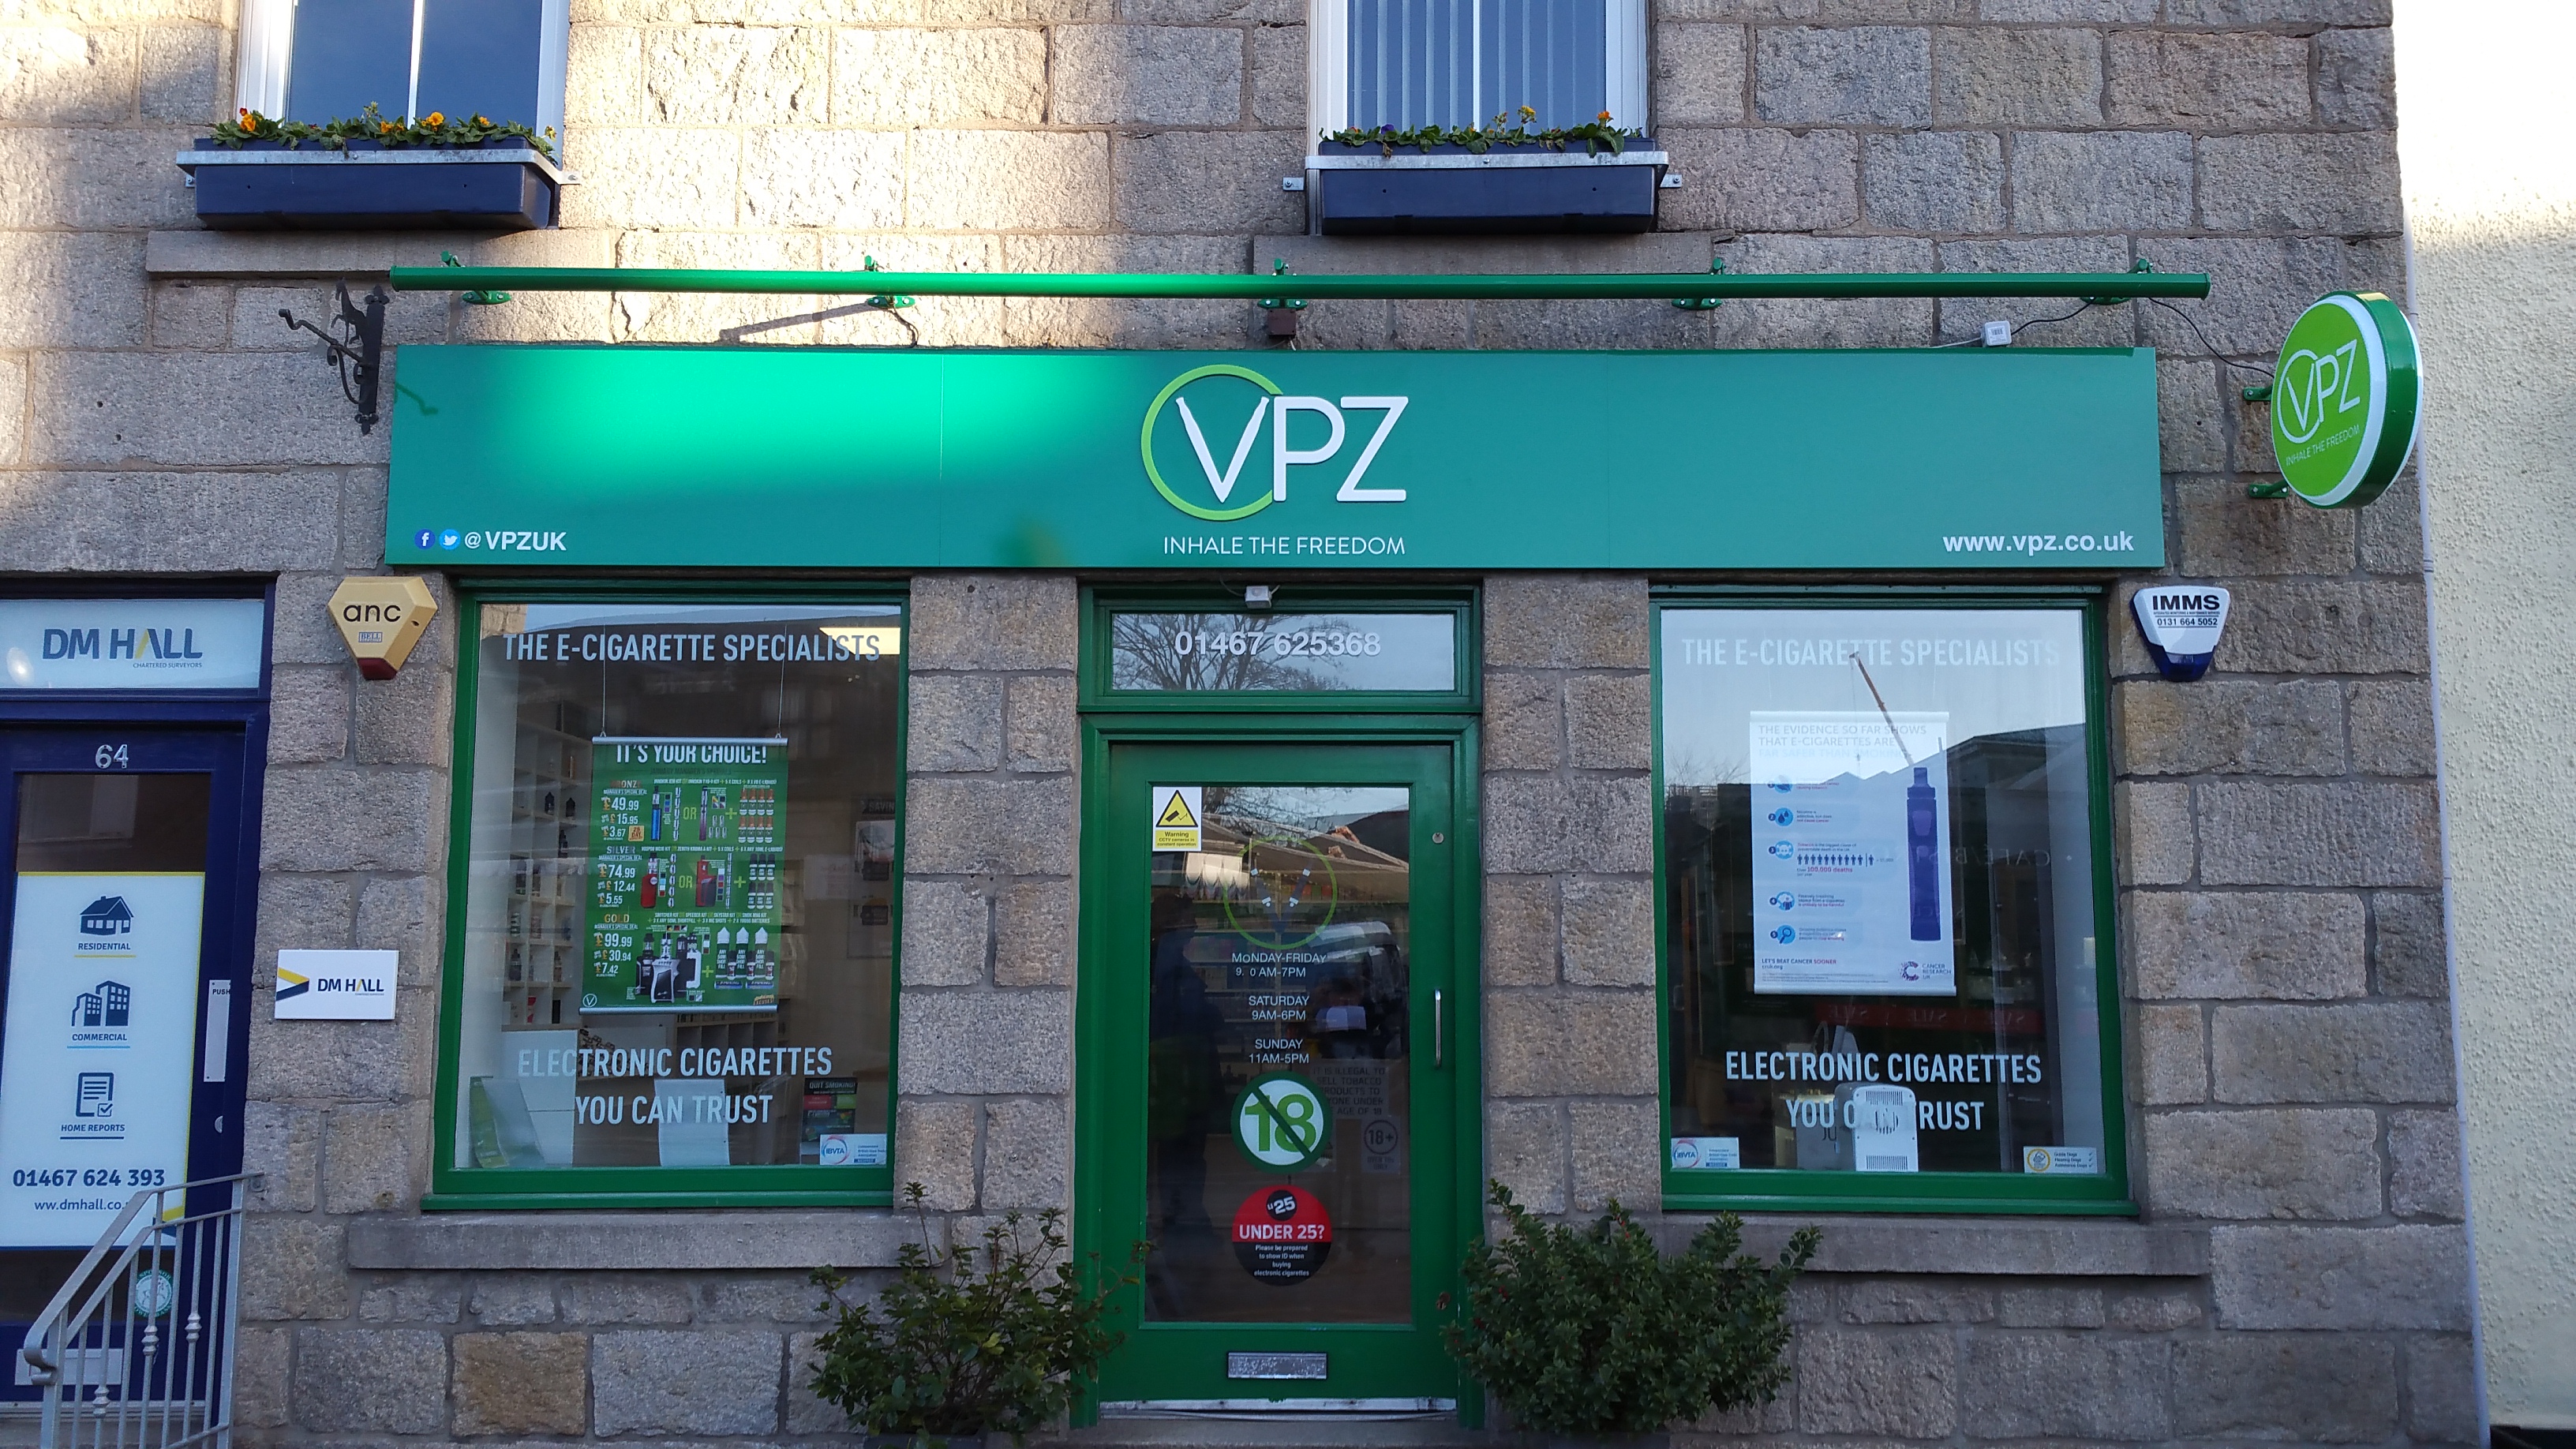 The UK’s biggest vaping retailer, VPZ, has attacked government cuts to smoking support services and said it is investing help address the issue (PA)